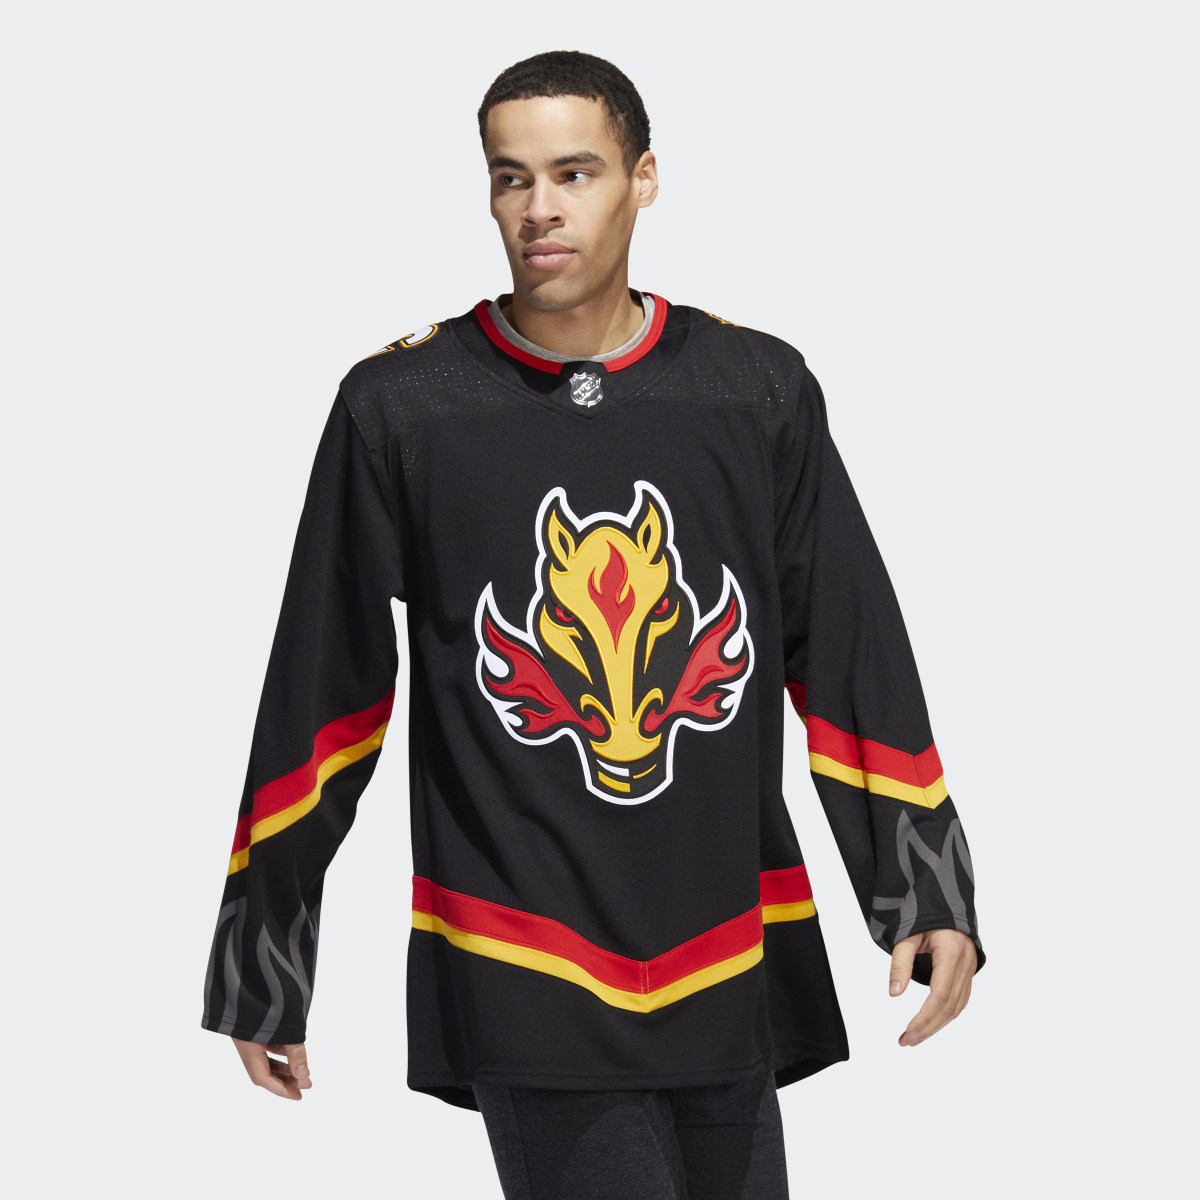 Adidas Flames Third Authentic Jersey. 4